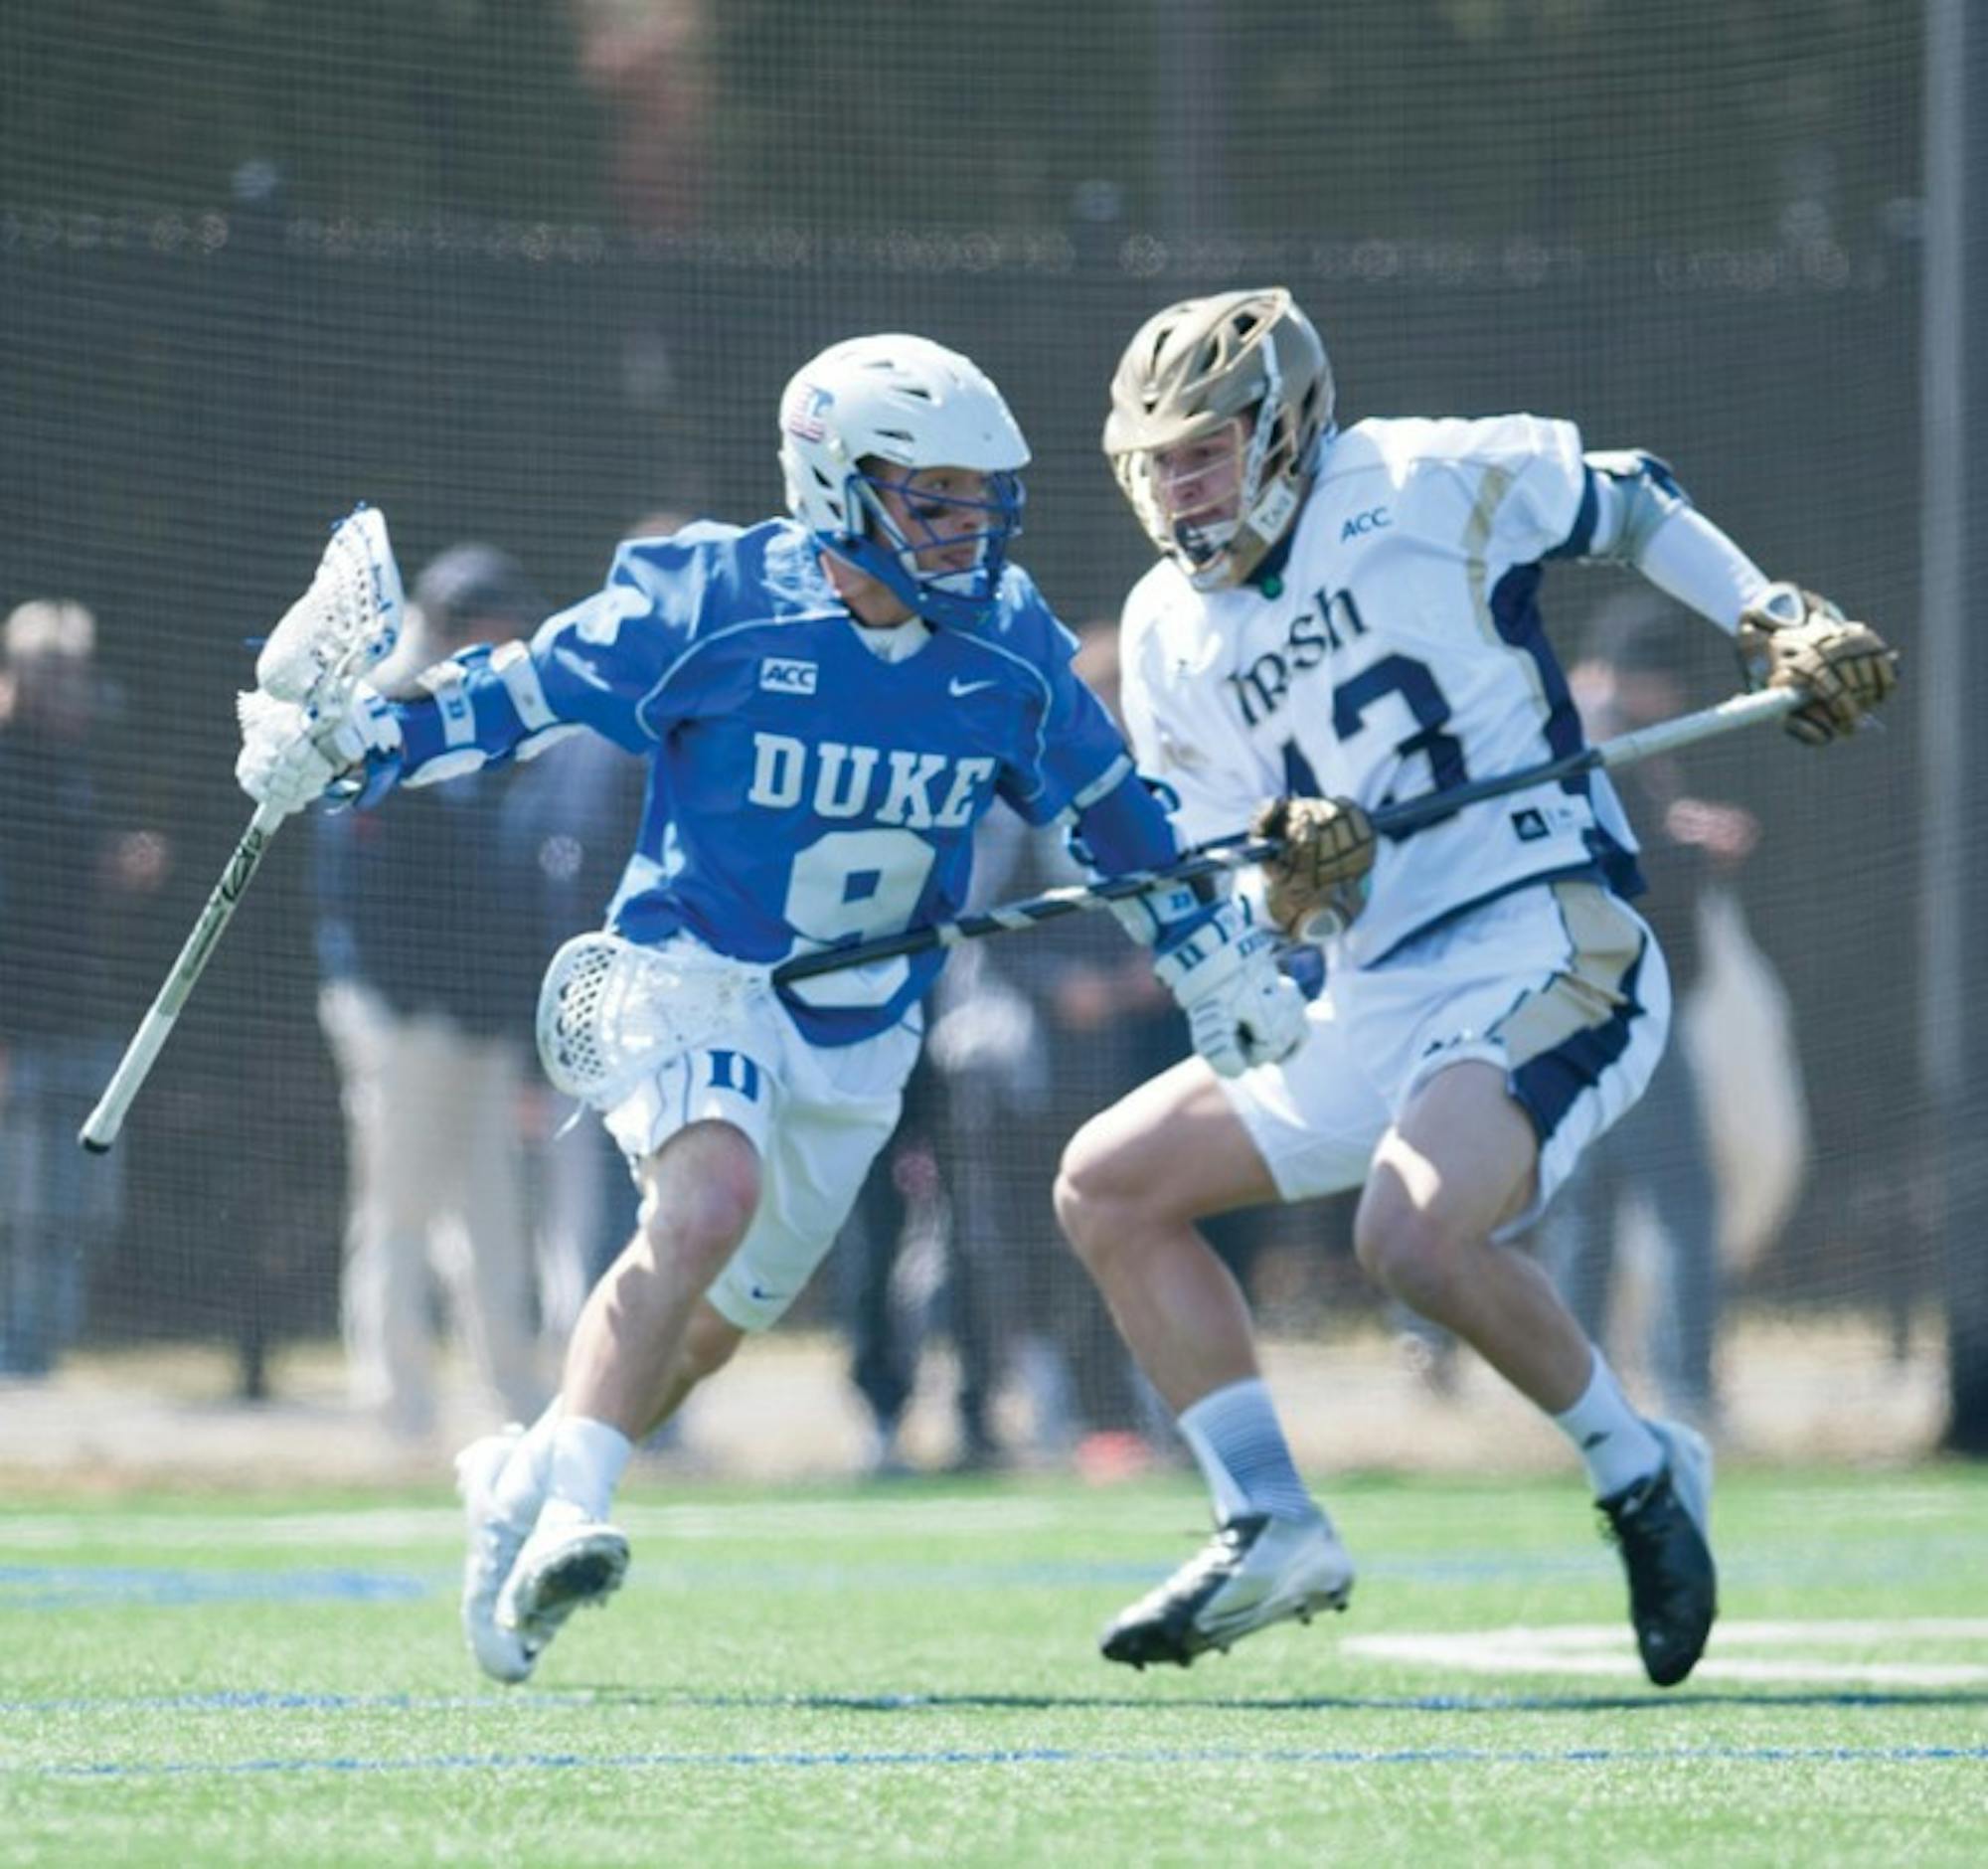 Irish senior midfield Tyler Brenneman defends Saturday during Notre Dame’s 15-7 loss to Duke. The defeat dropped the Irish to 2-2 in ACC play.